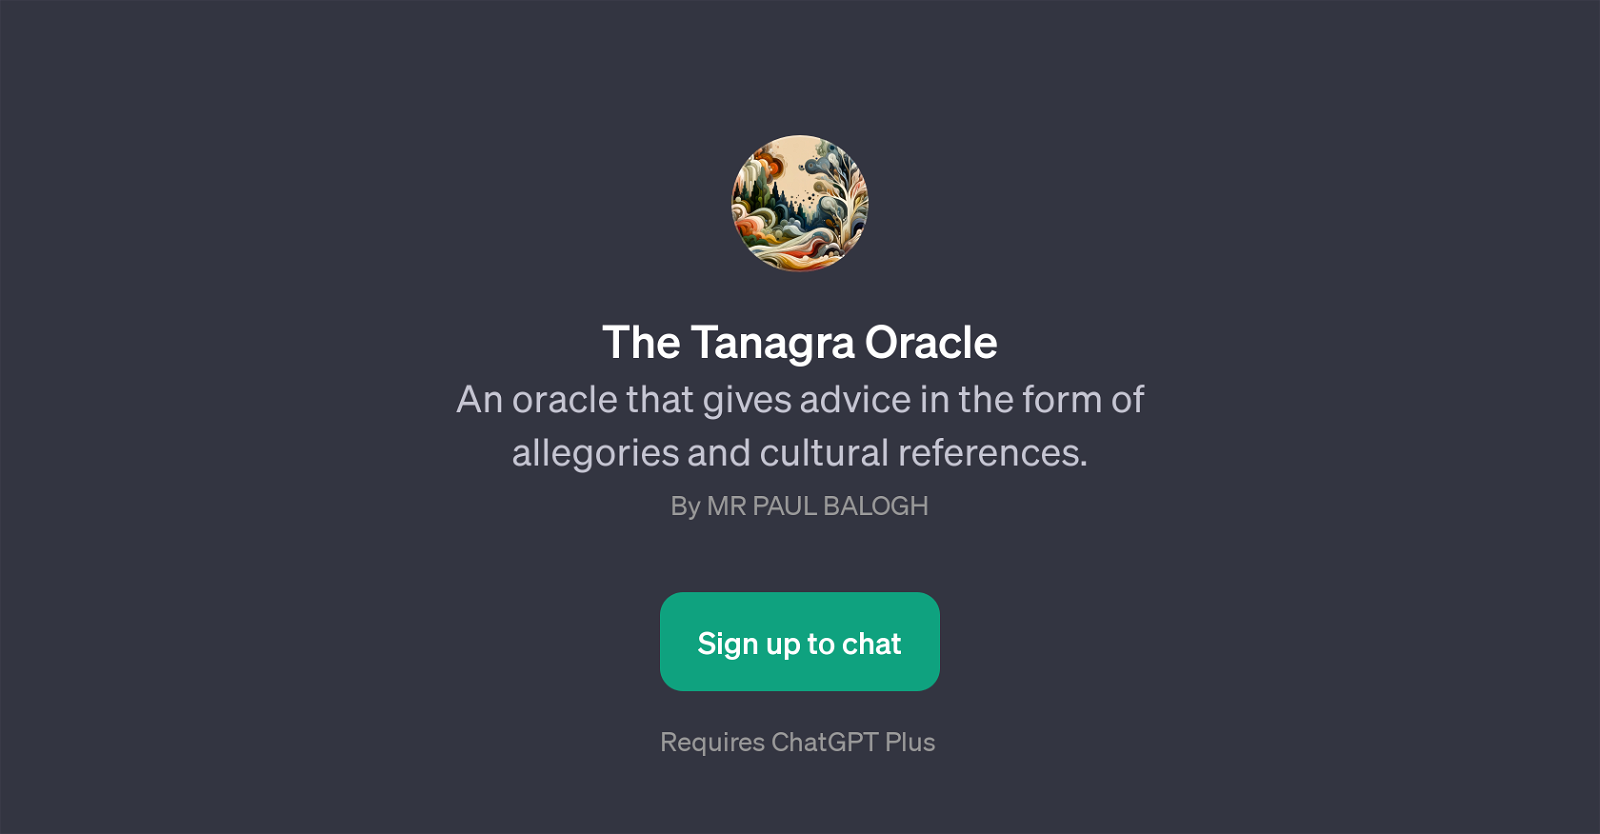 The Tanagra Oracle website